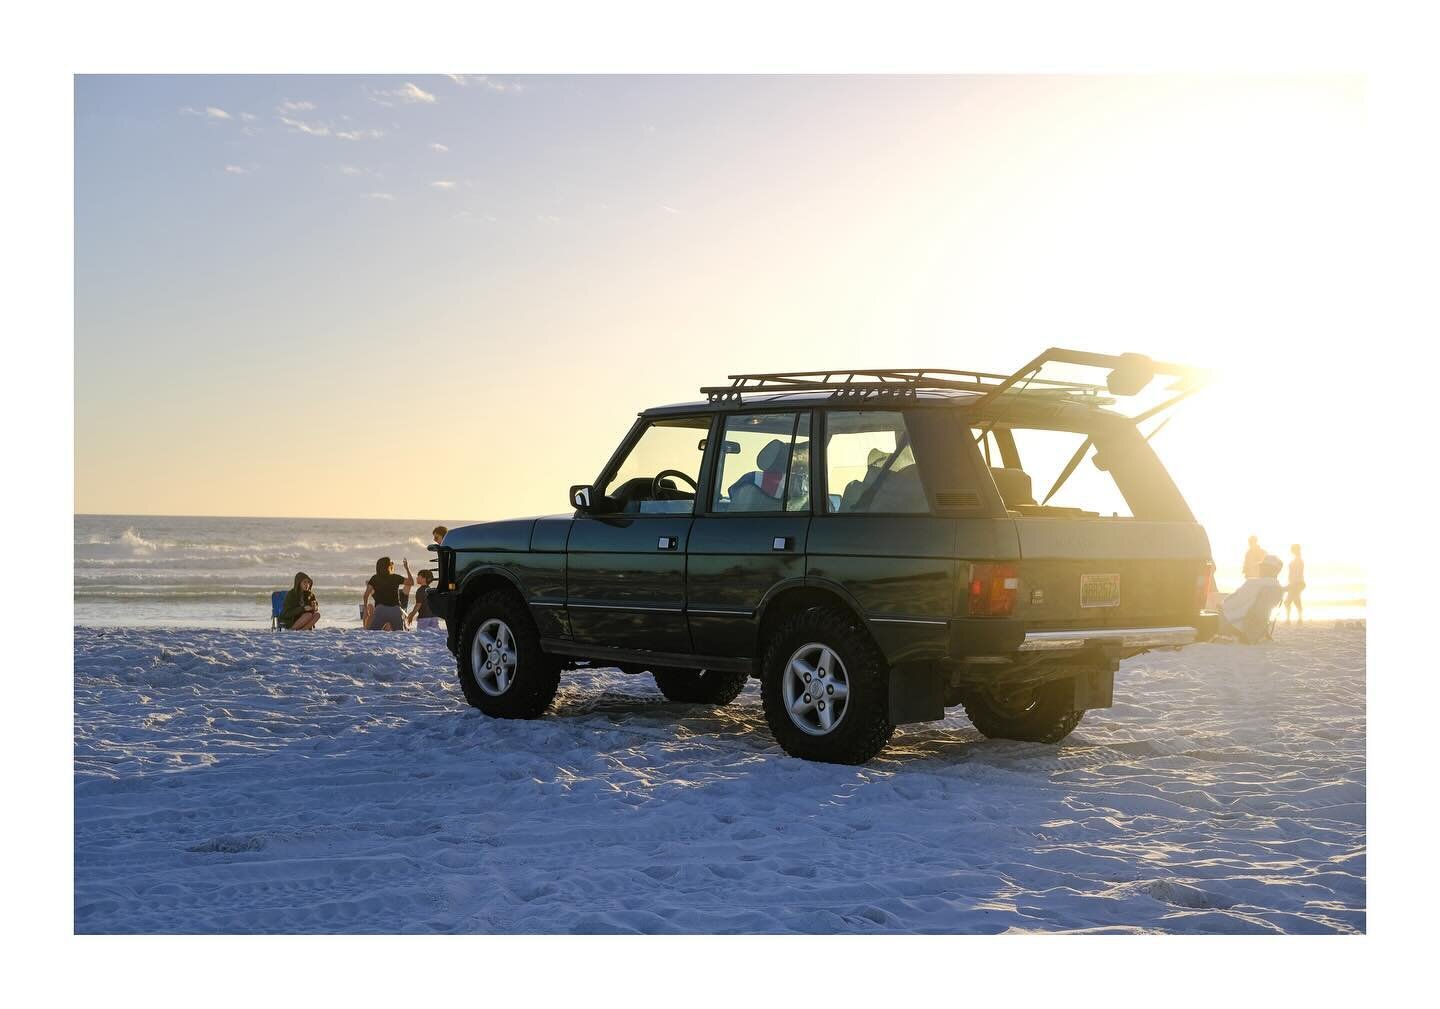 The good life 🏁

@landrover @landroverusa #landrover #landroverusa #rangerover #graytonbeach #graytonbeachfl #sunset #oceanview #dreamcars #driveclassics #classicdriver #southwalton #sowal #carsof30a #camberevents #30a #beachlife #beachvibes